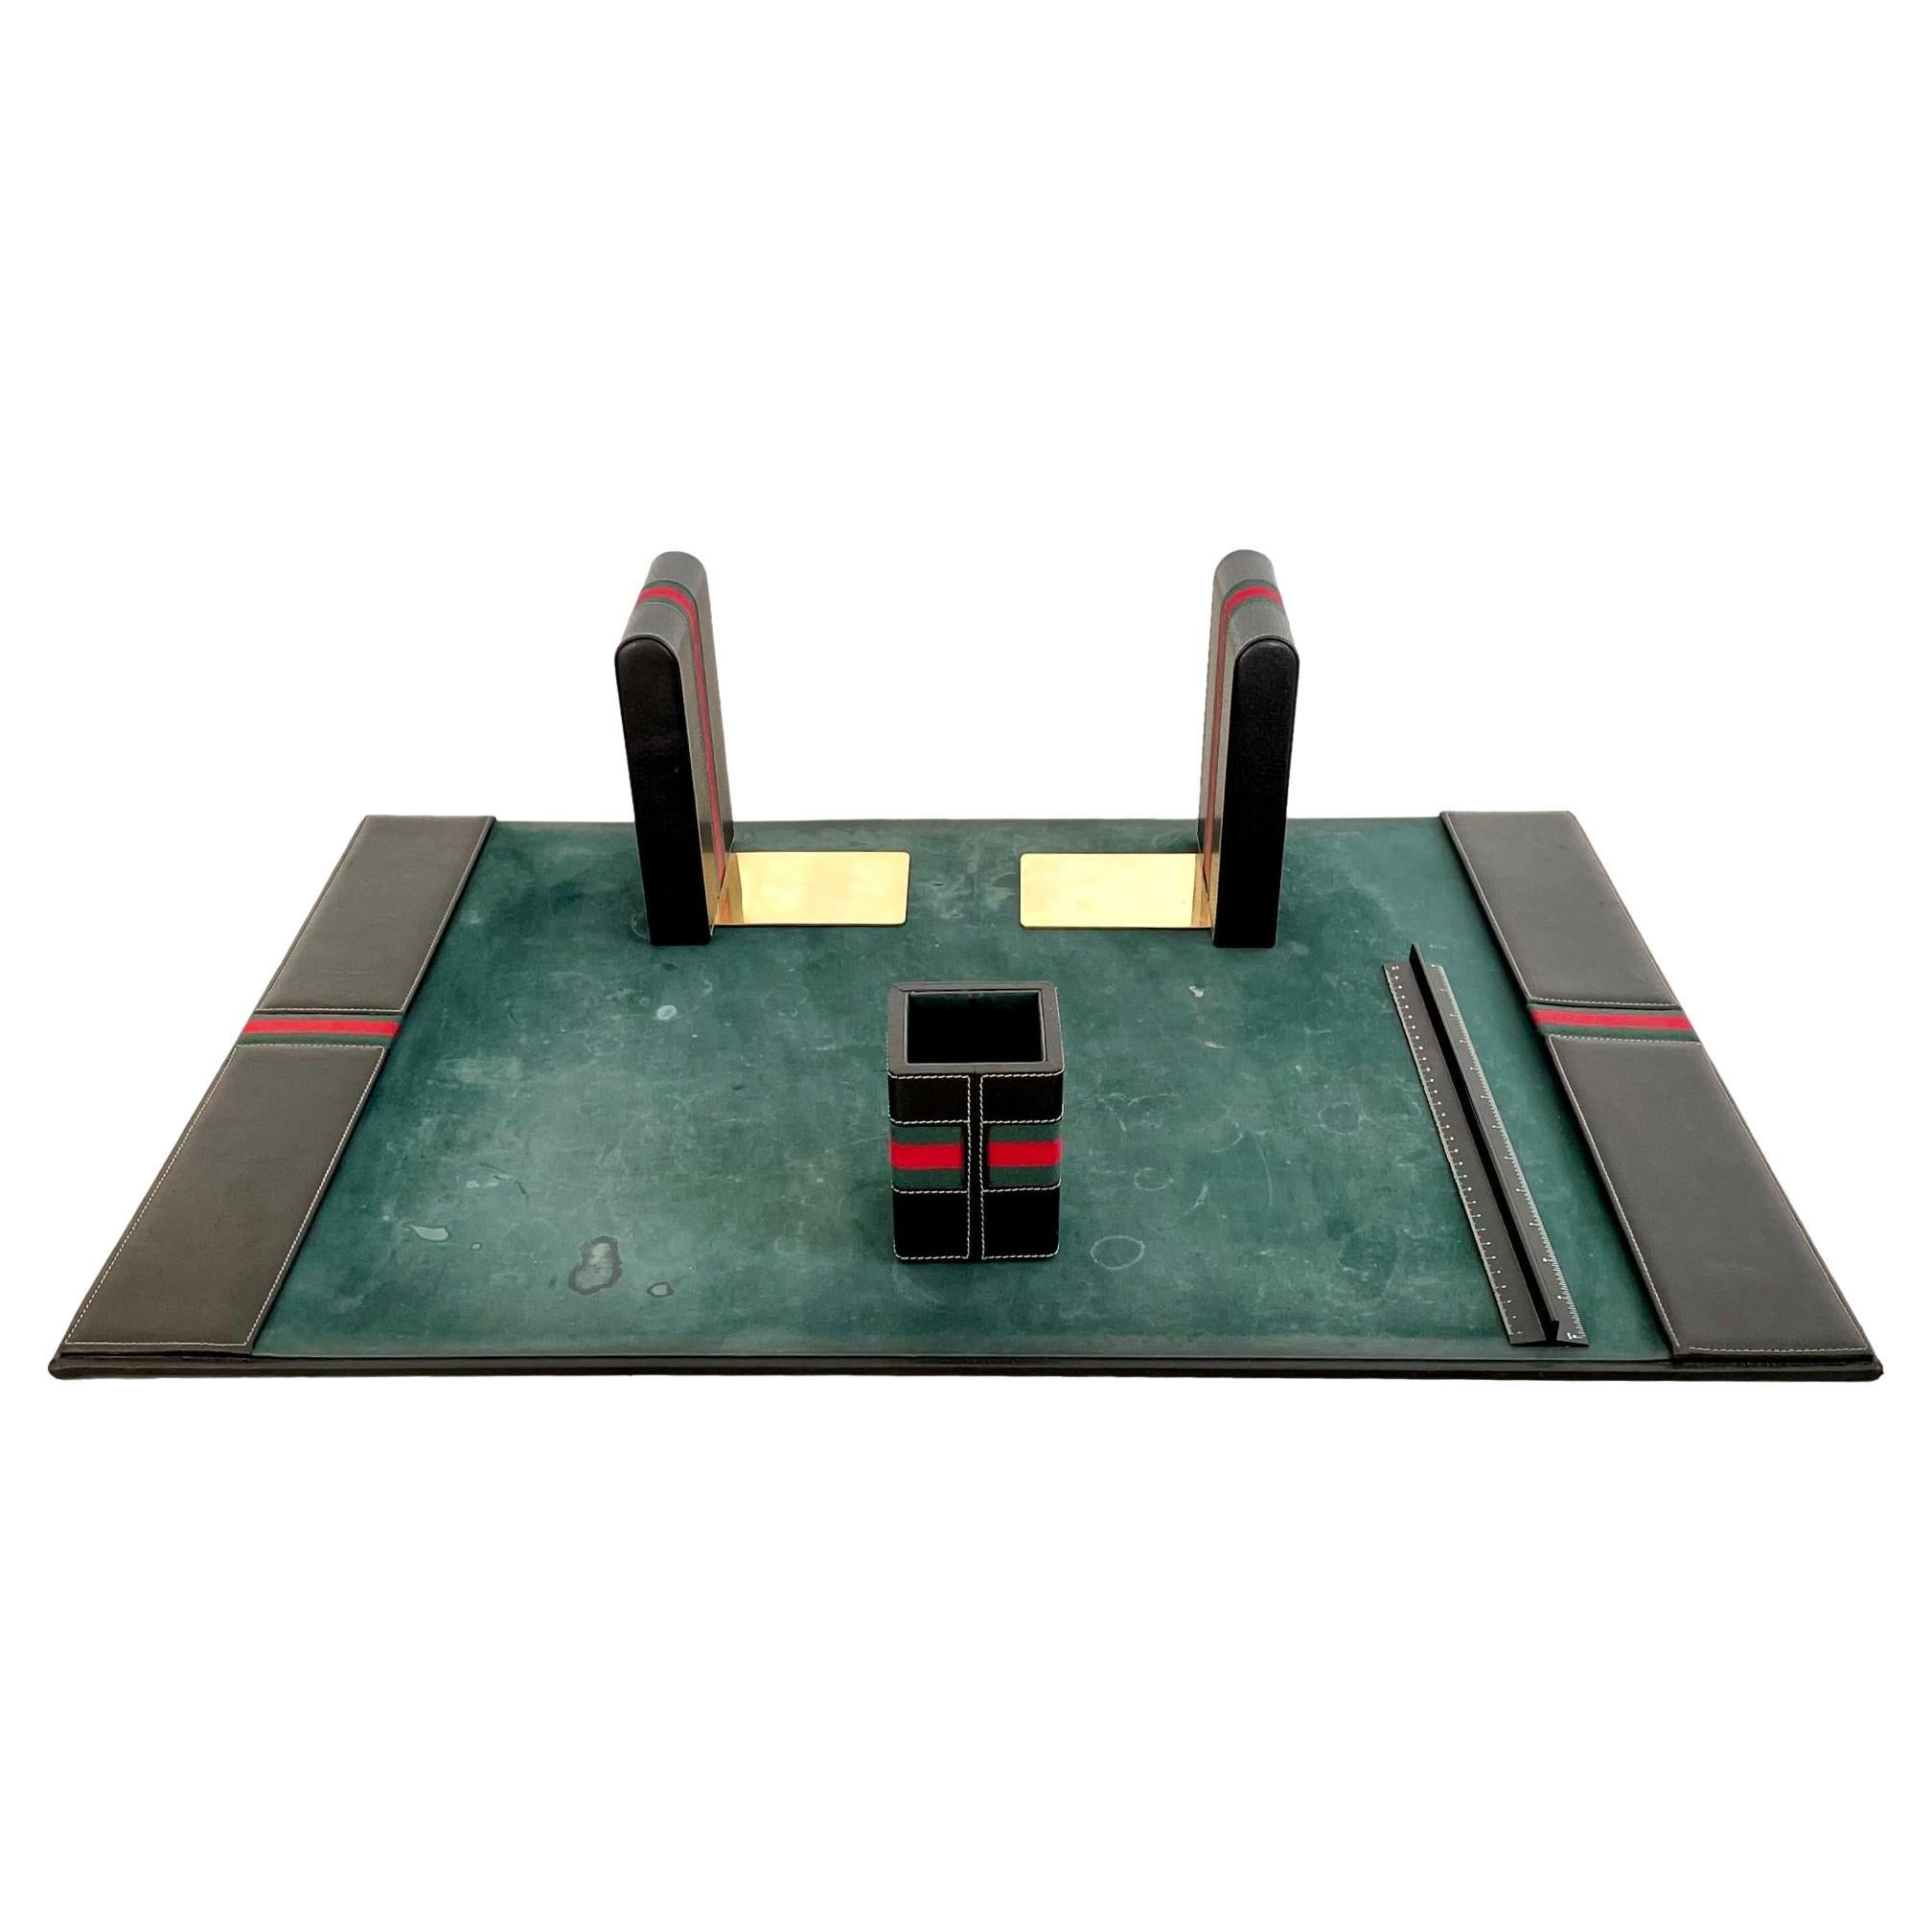 Gucci Leather and Velvet Desk Set, 1980s Italy For Sale